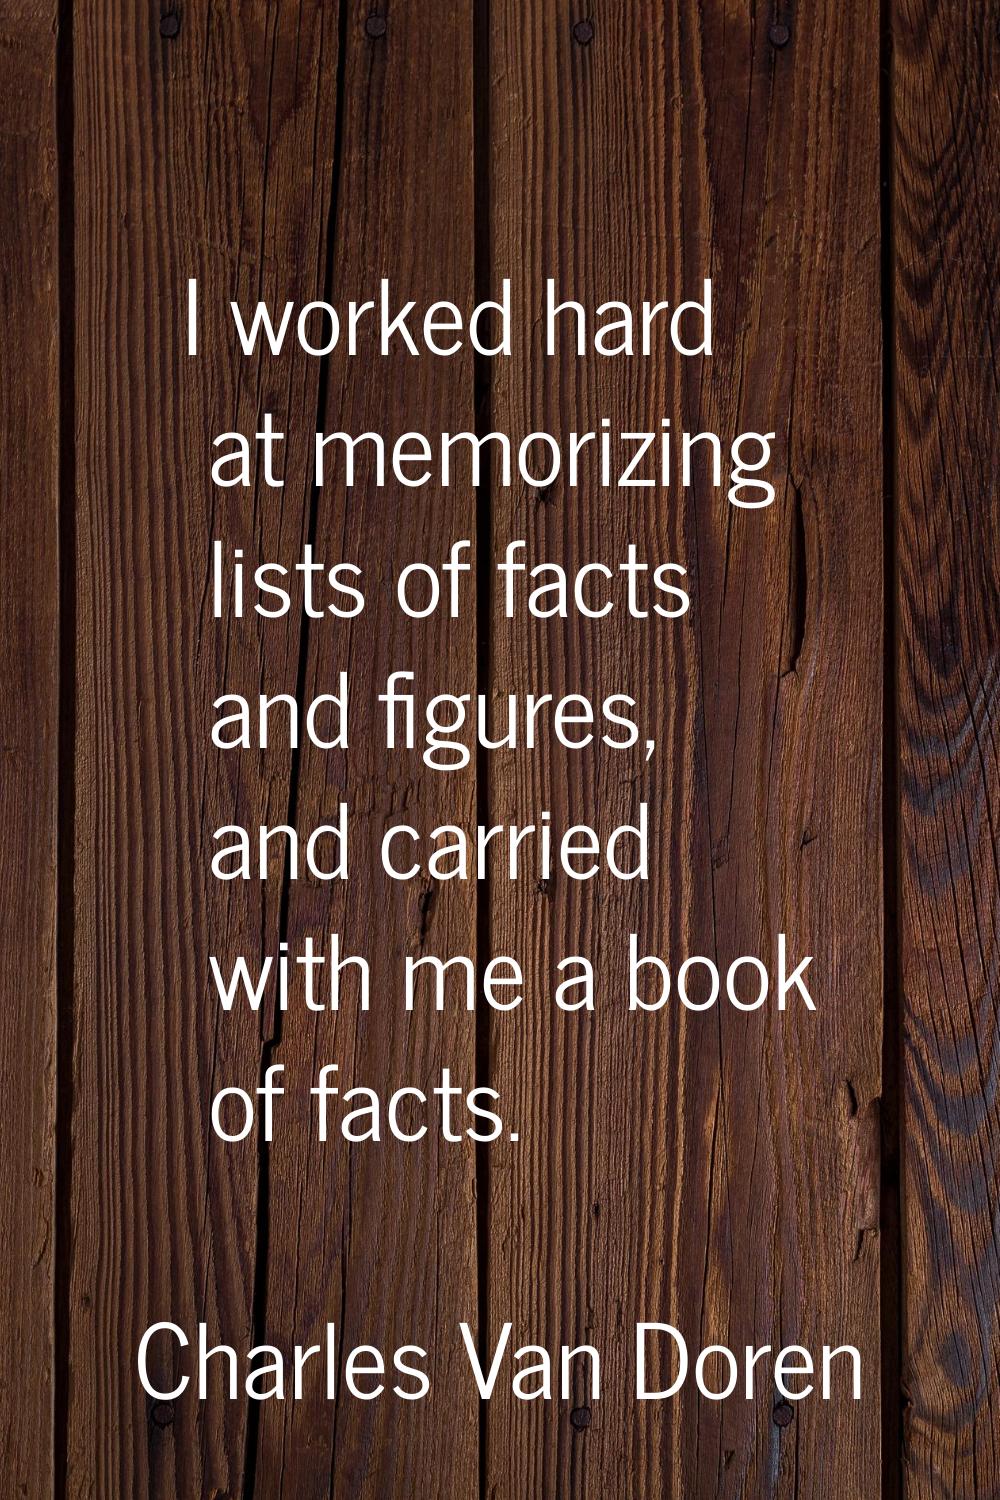 I worked hard at memorizing lists of facts and figures, and carried with me a book of facts.